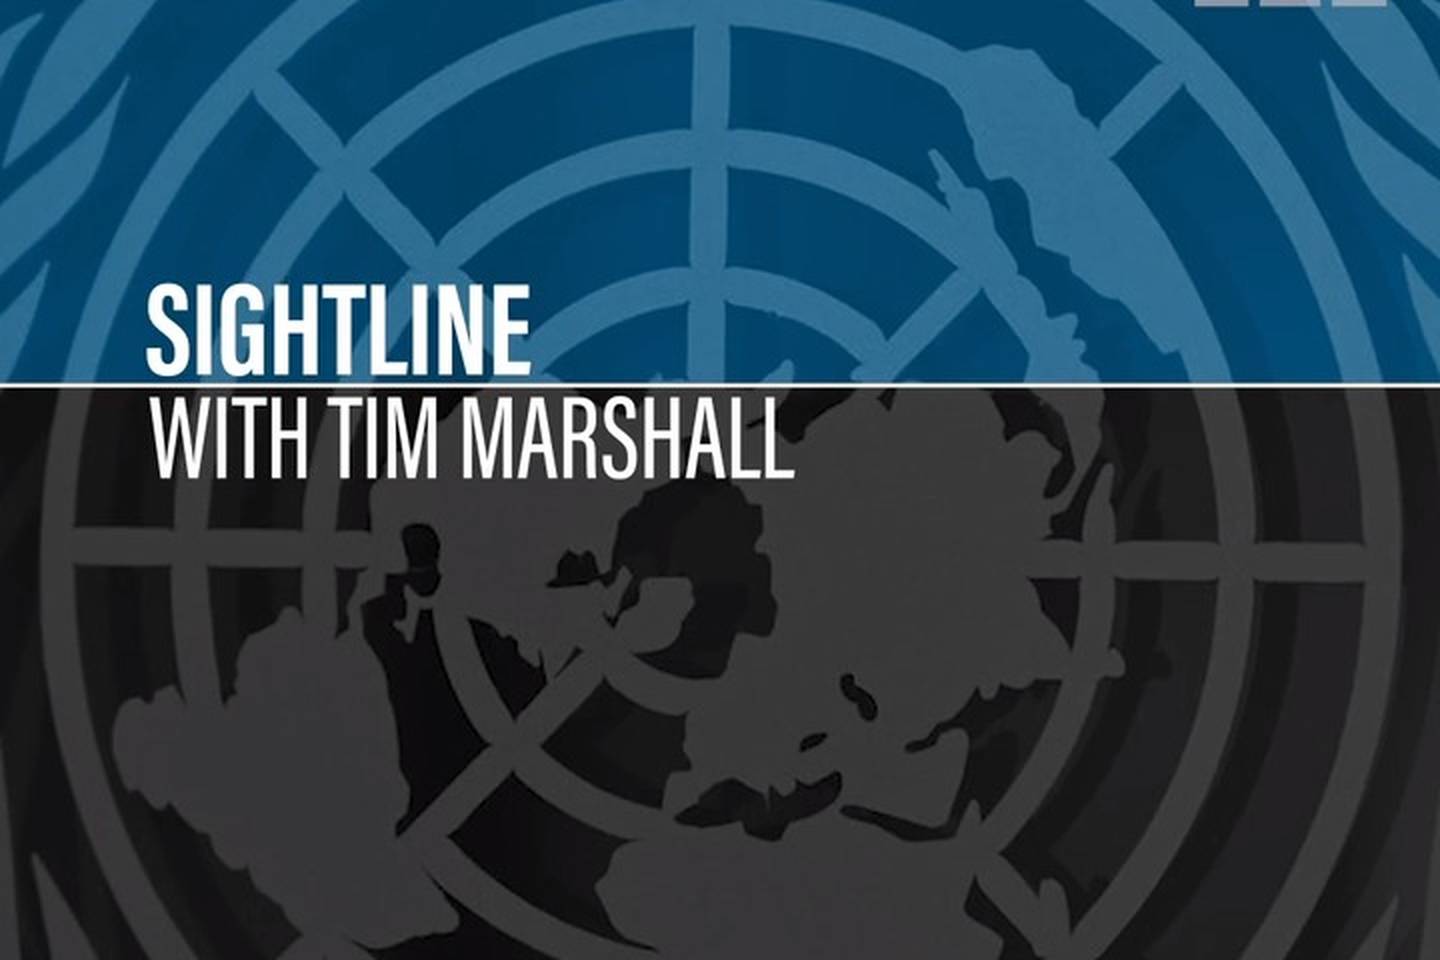 Sightline with Tim Marshall - UNGA in the midst of Covid pandemic 